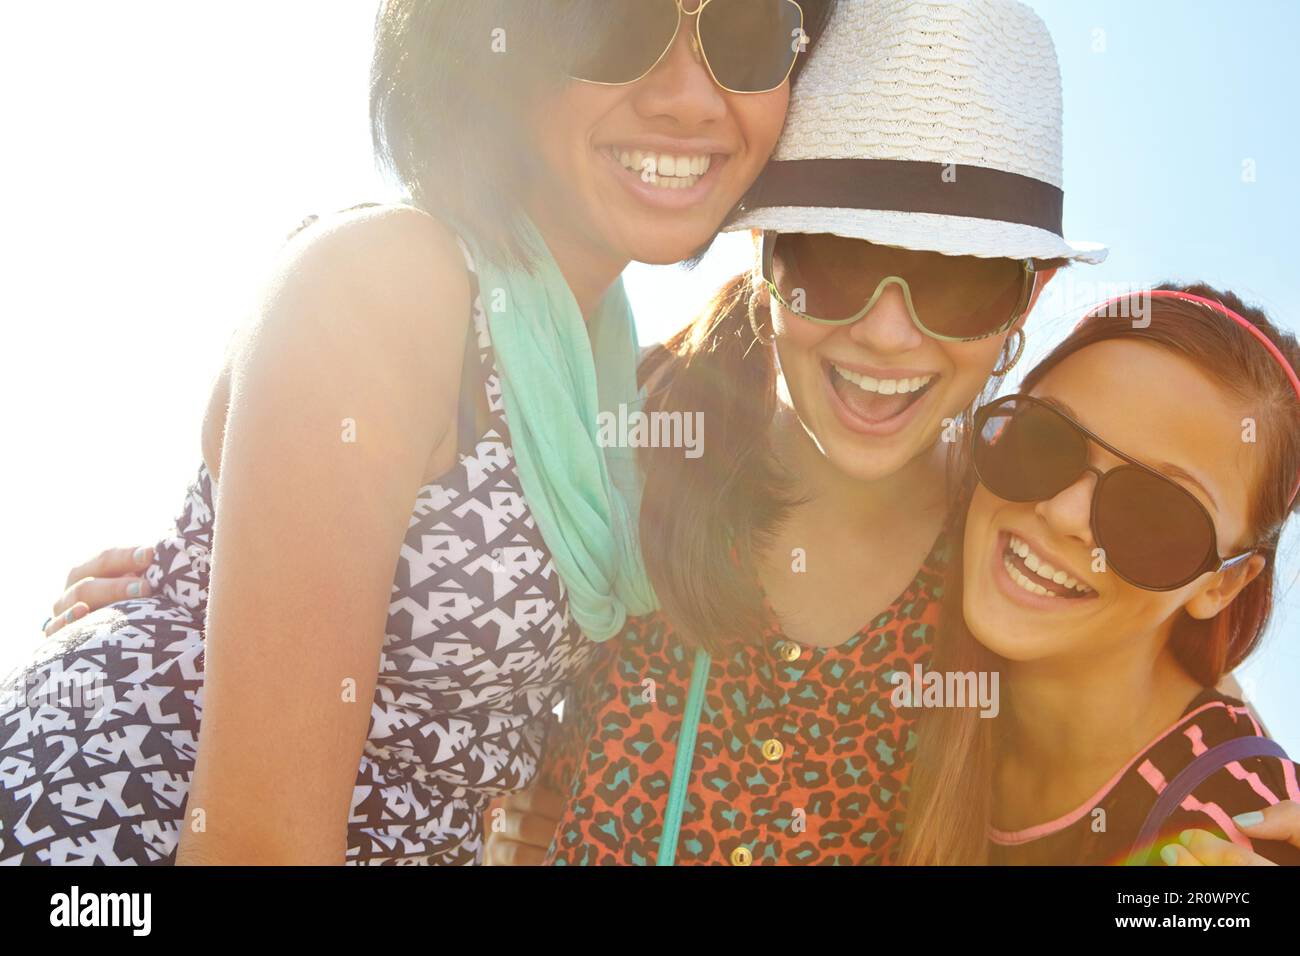 Three of a kind. Closeup shot of a group of teenage girls smiling with their arms around each others shoulders. Stock Photo